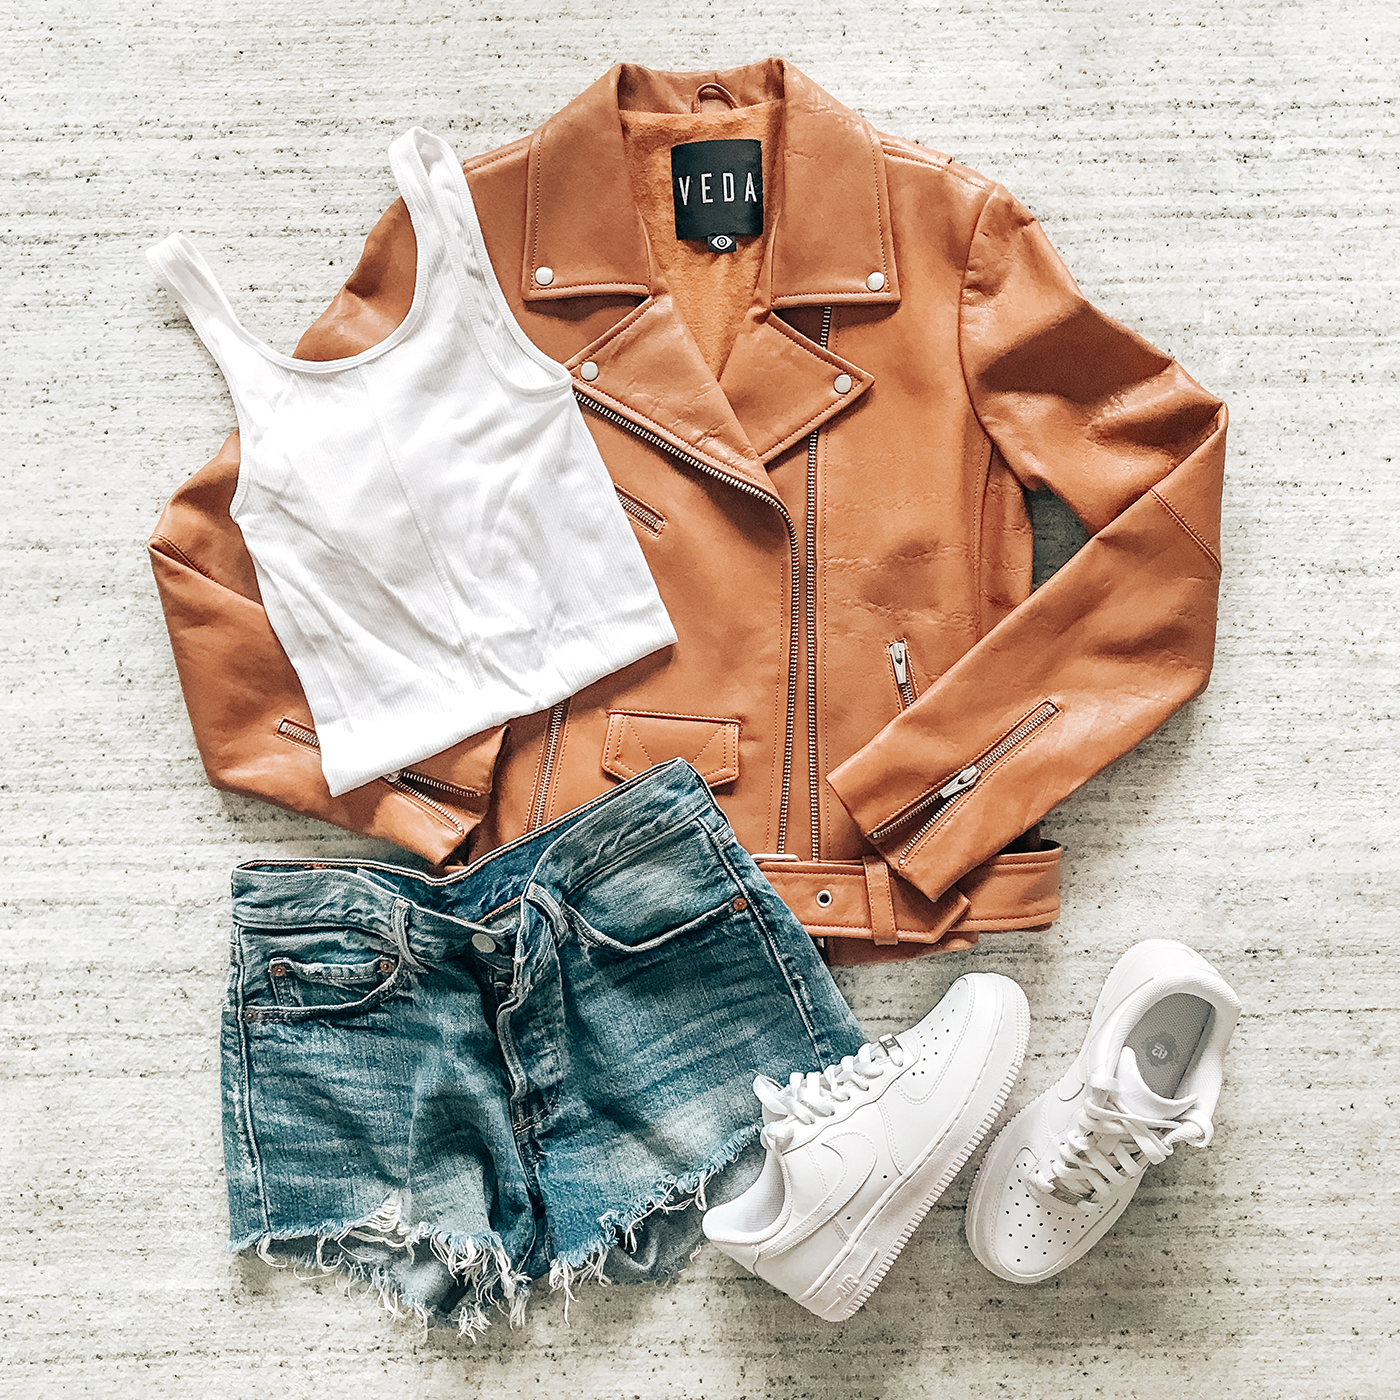 Daily Style Finds: New White Sneakers, 501 Levi's Shorts + Leather Jacket